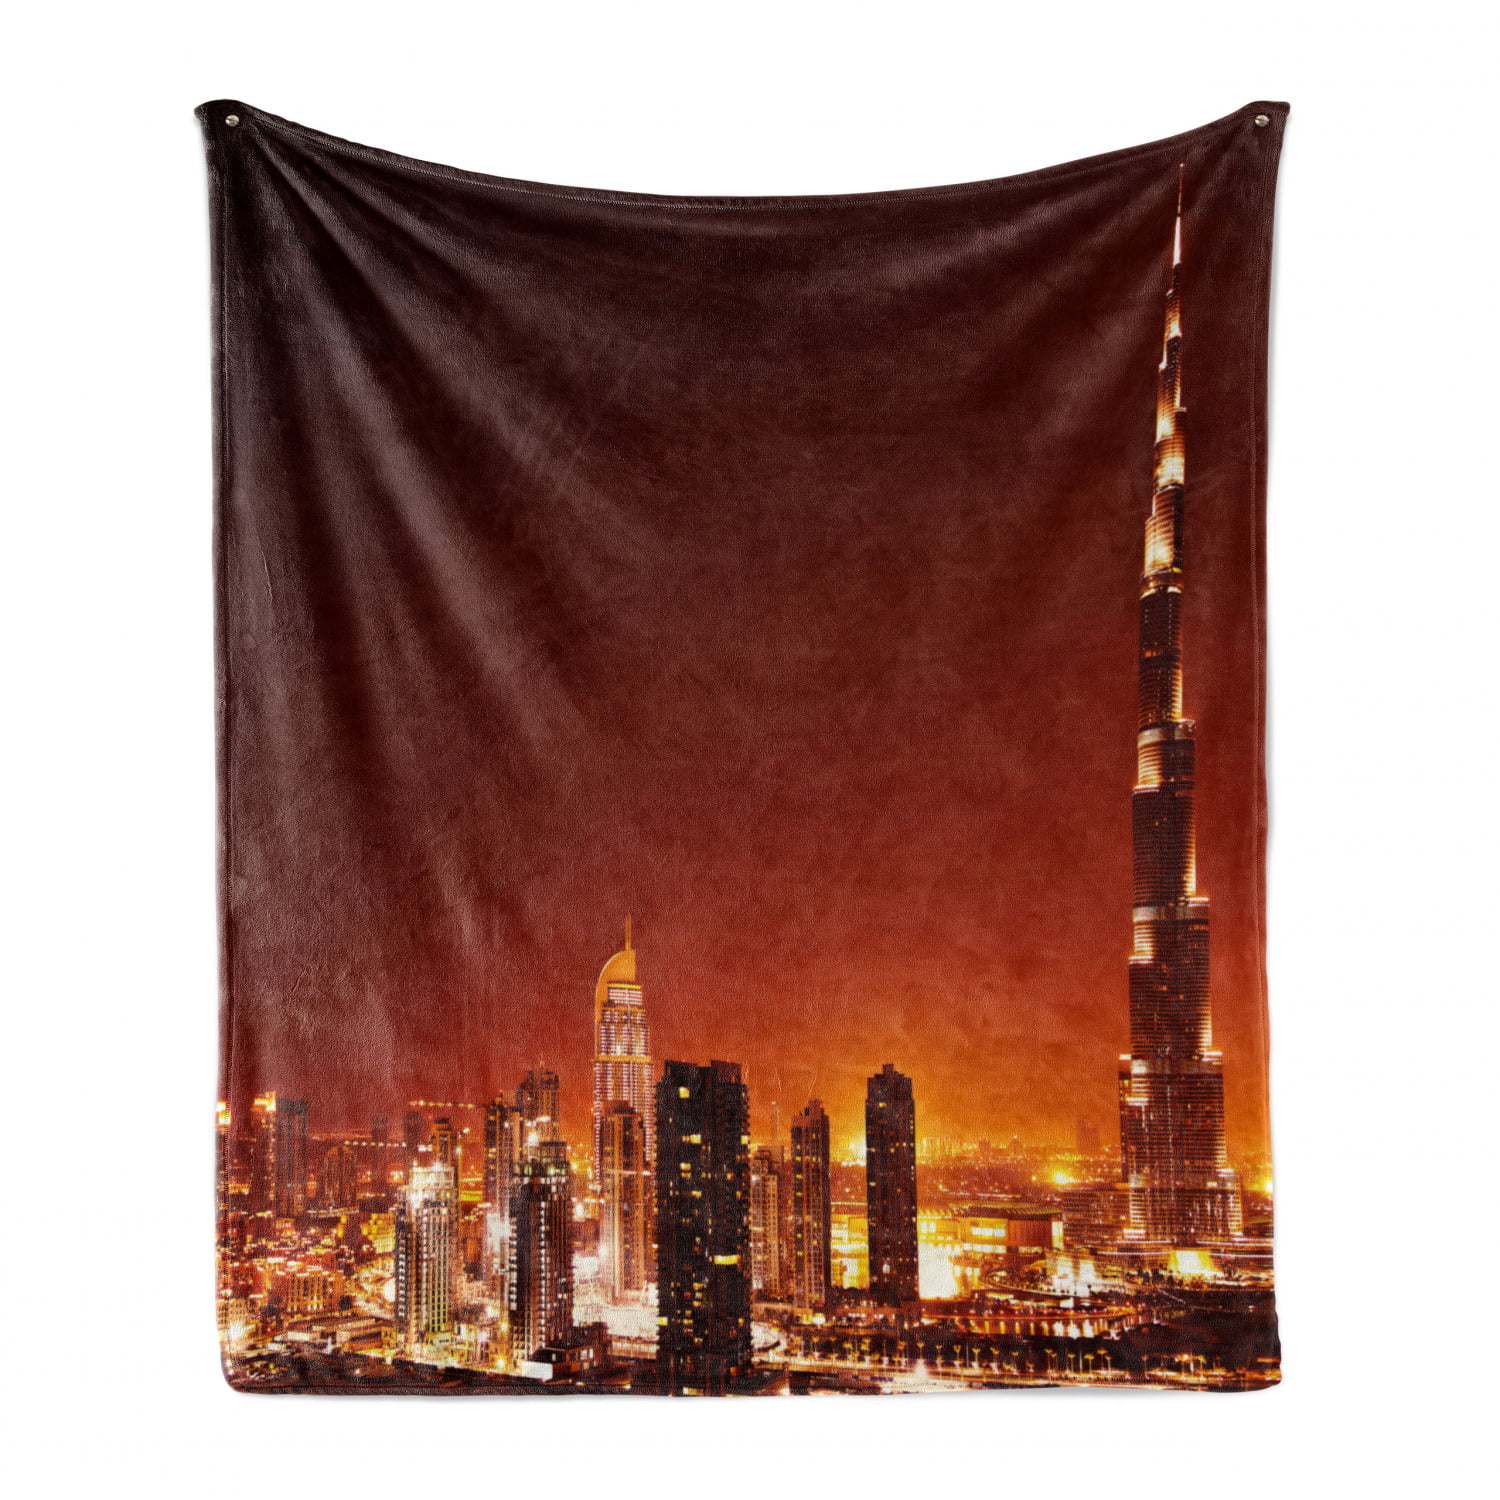 Cozy Plush for Indoor and Outdoor Use Multicolor Ambesonne Landscape Soft Flannel Fleece Throw Blanket 70 x 90 Dubai Downtown with Cityscape Skyscrapers Sunset Middle East City Photo 